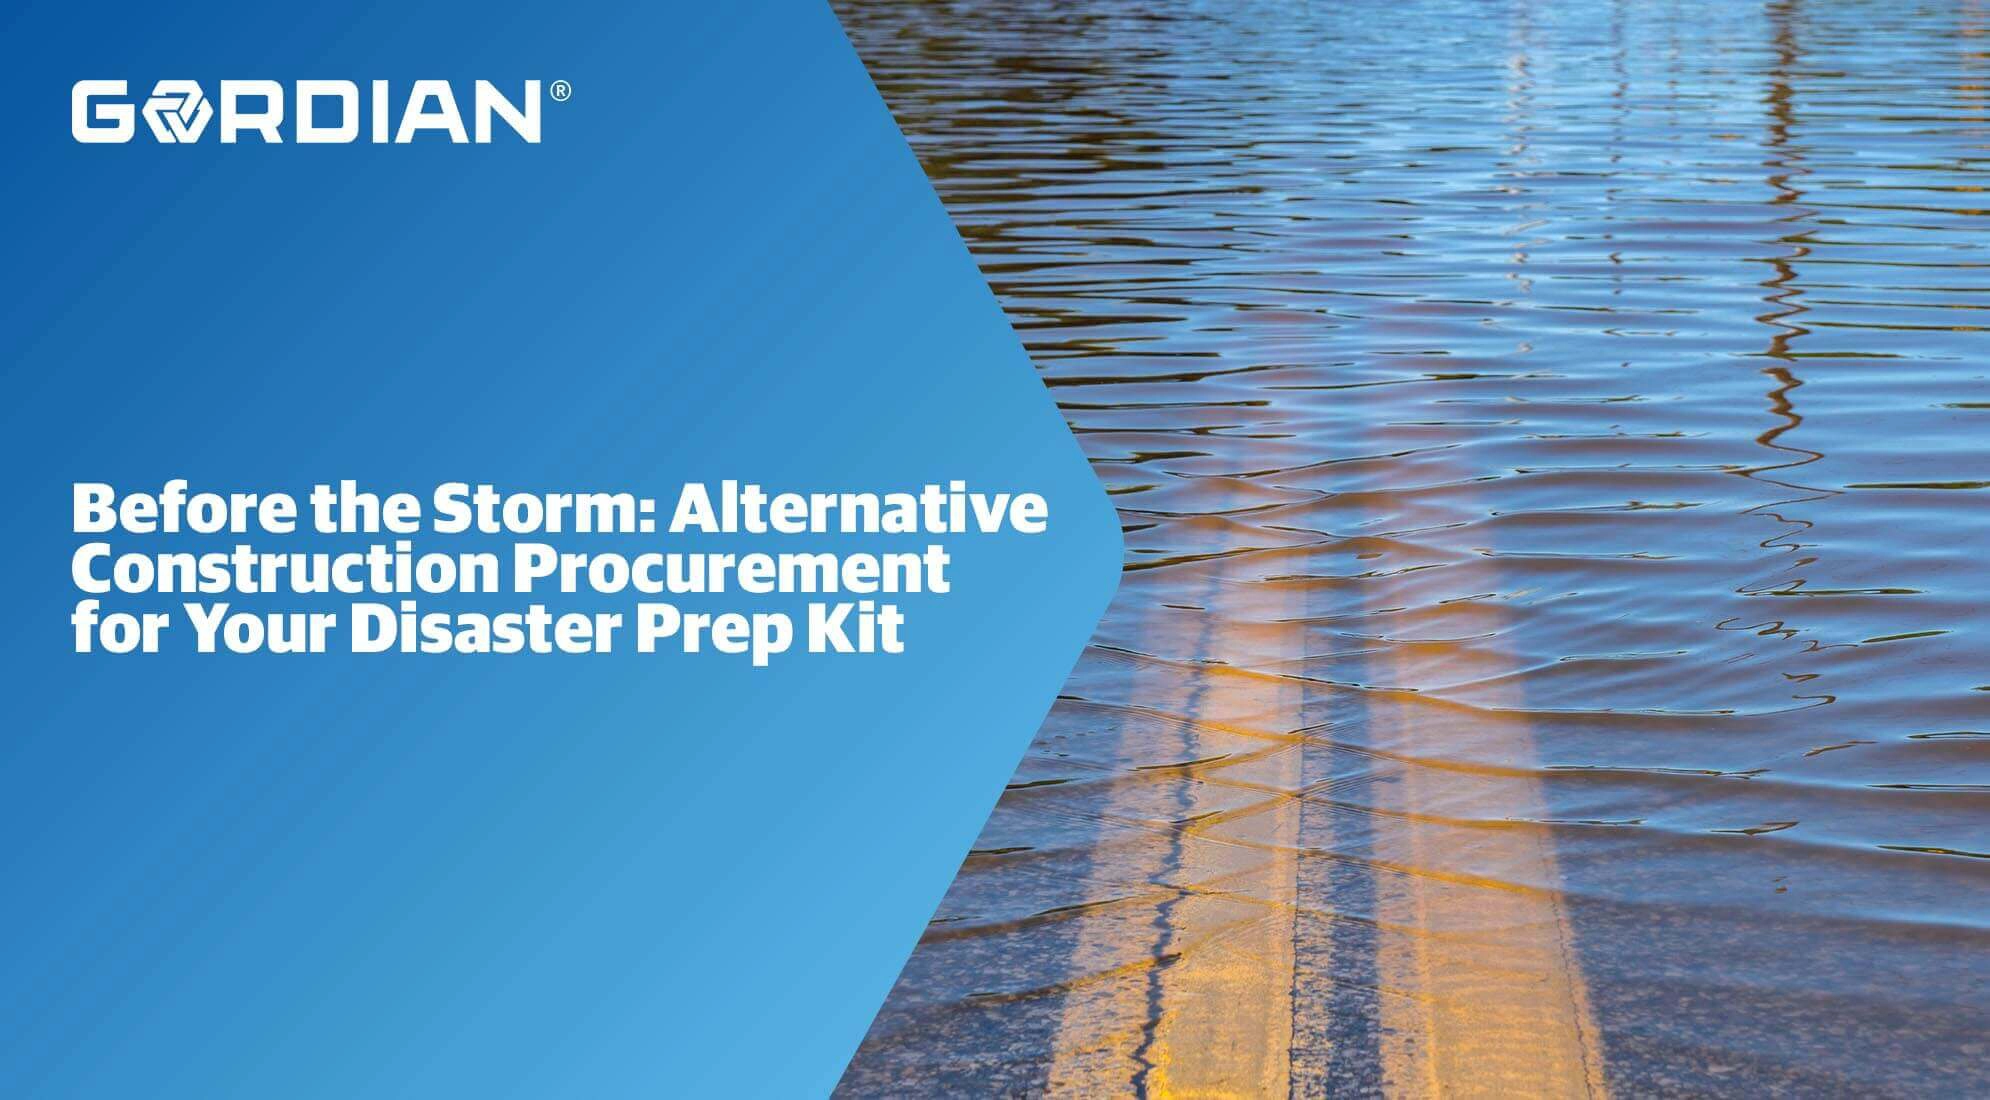 Before the Storm: Alternative Construction Procurement for Your Disaster Prep Kit 2